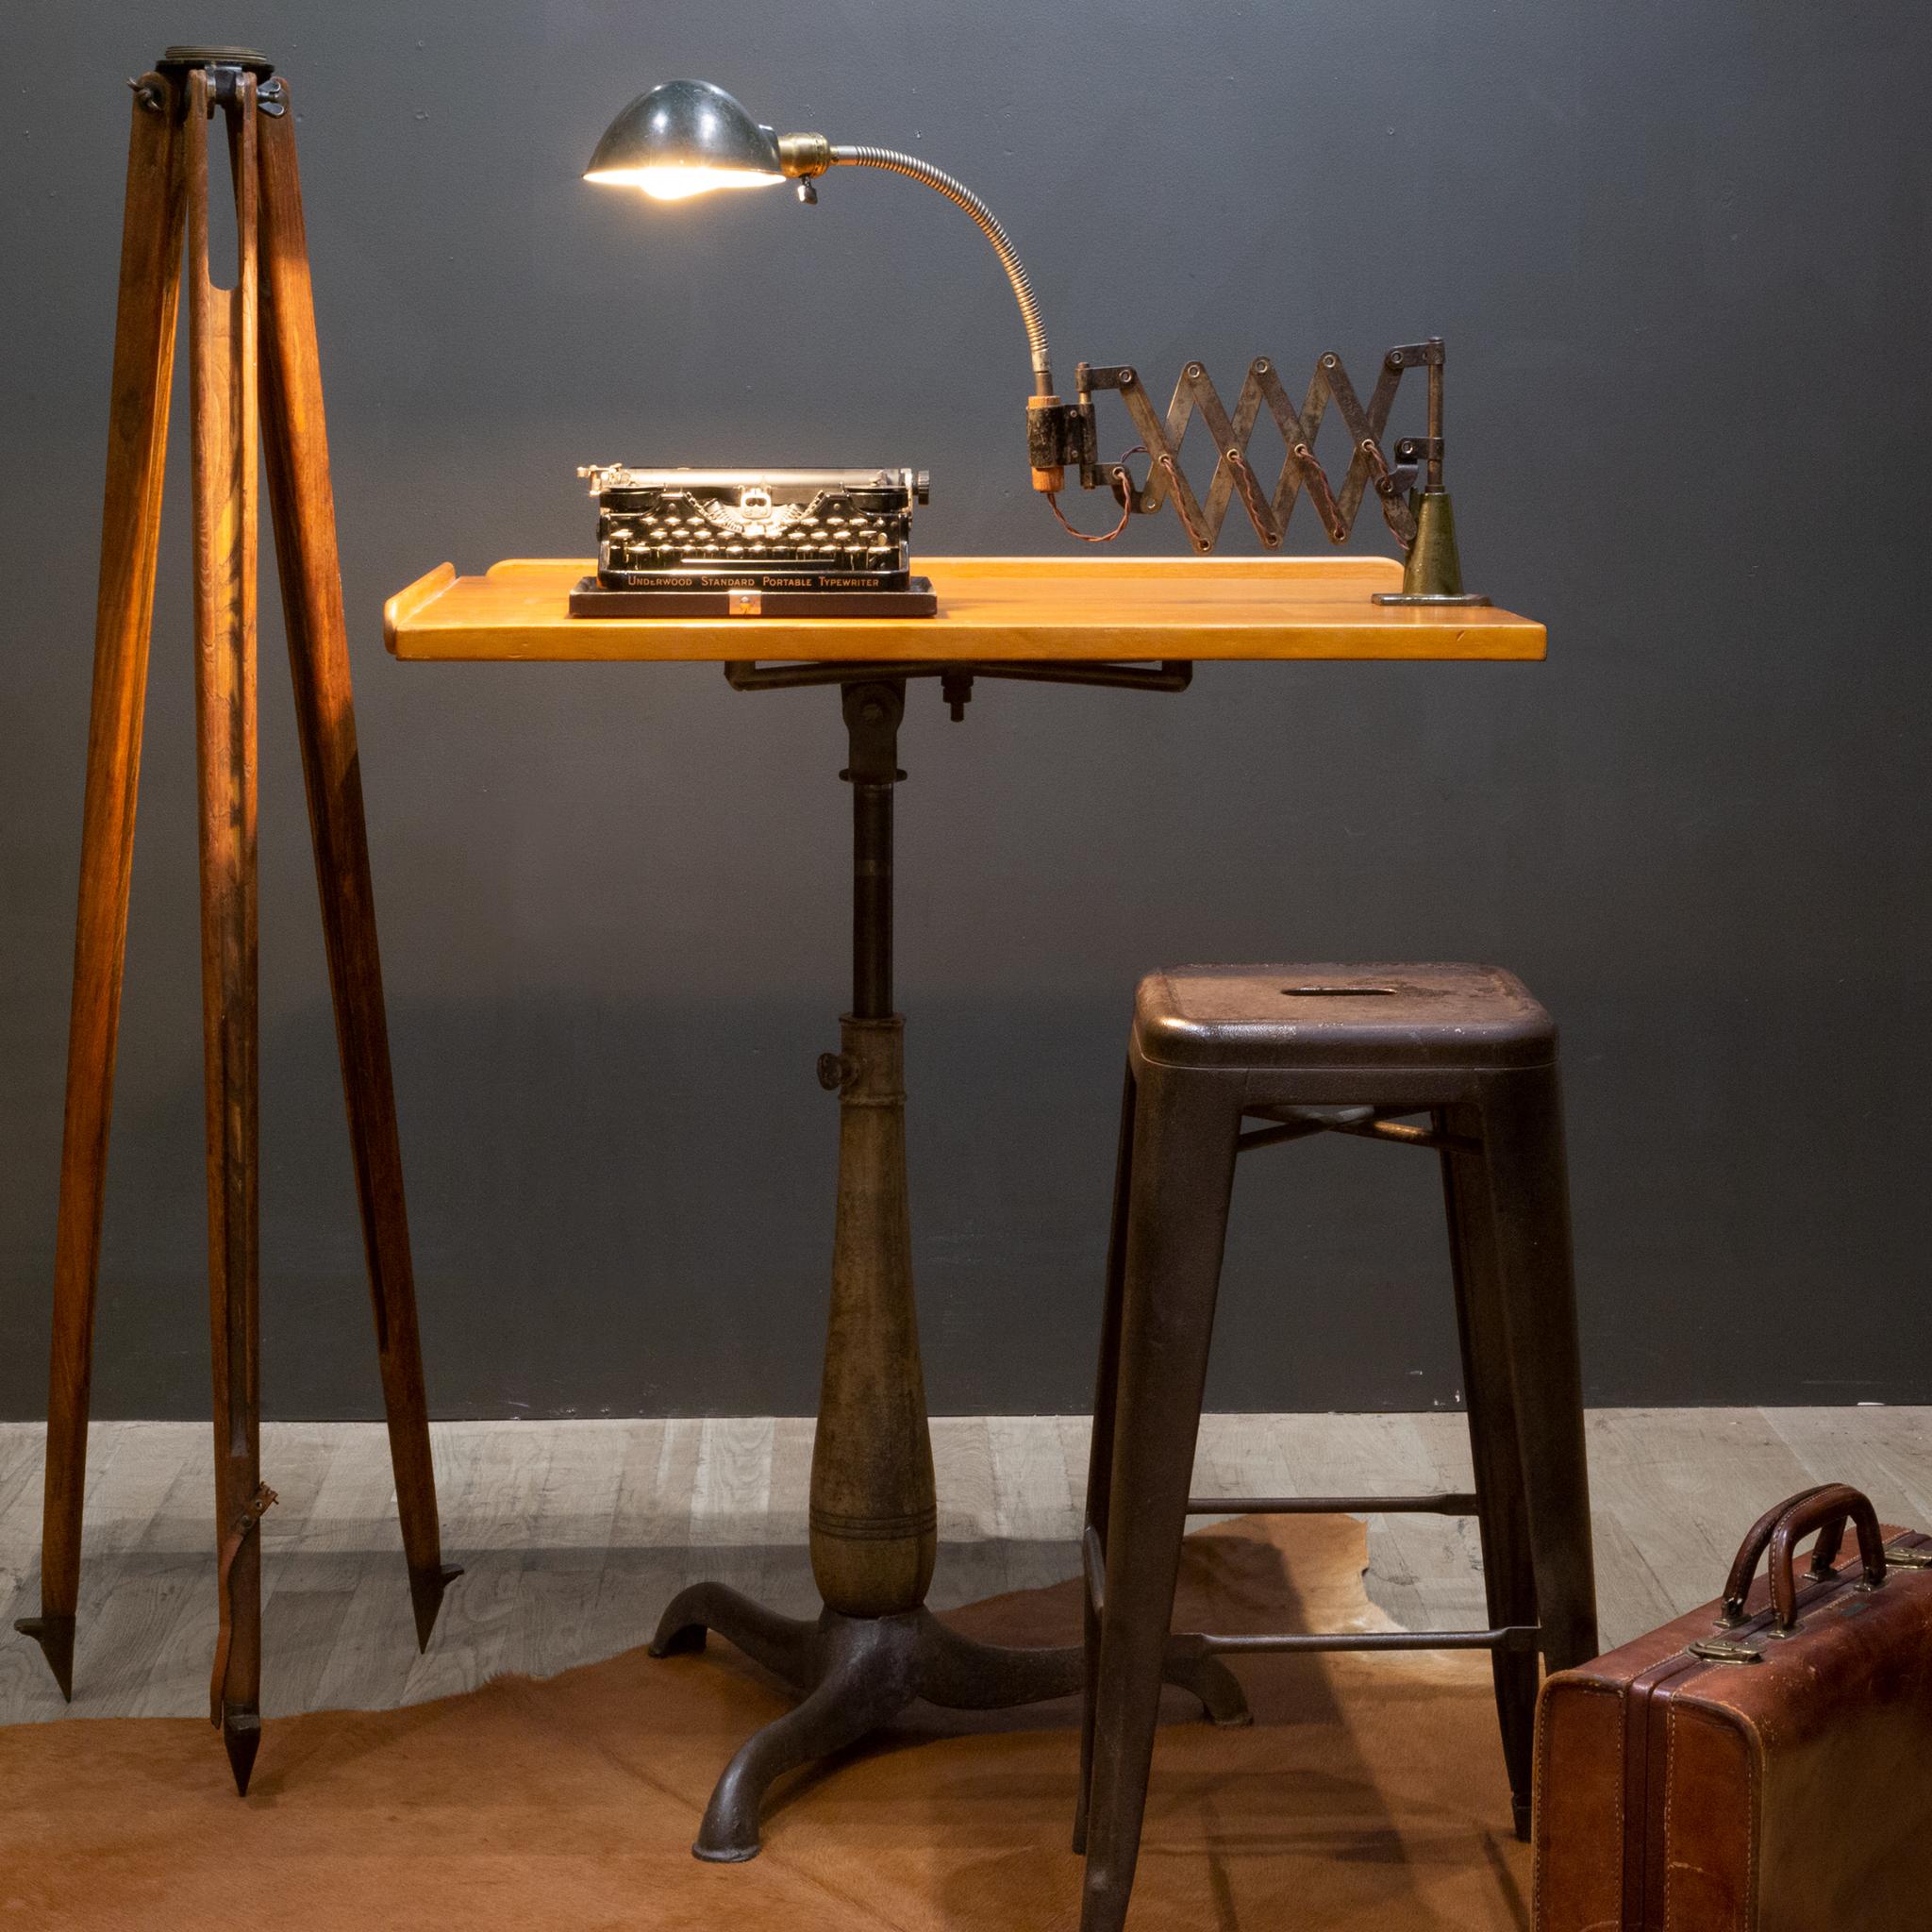 About

An industrial table mount scissor task lamp with metal shades, cast iron base, original fabric cord and articulating arm. Fully adjustable, the shade tilts and the arm can extend fully. This piece has retained its original finish and works